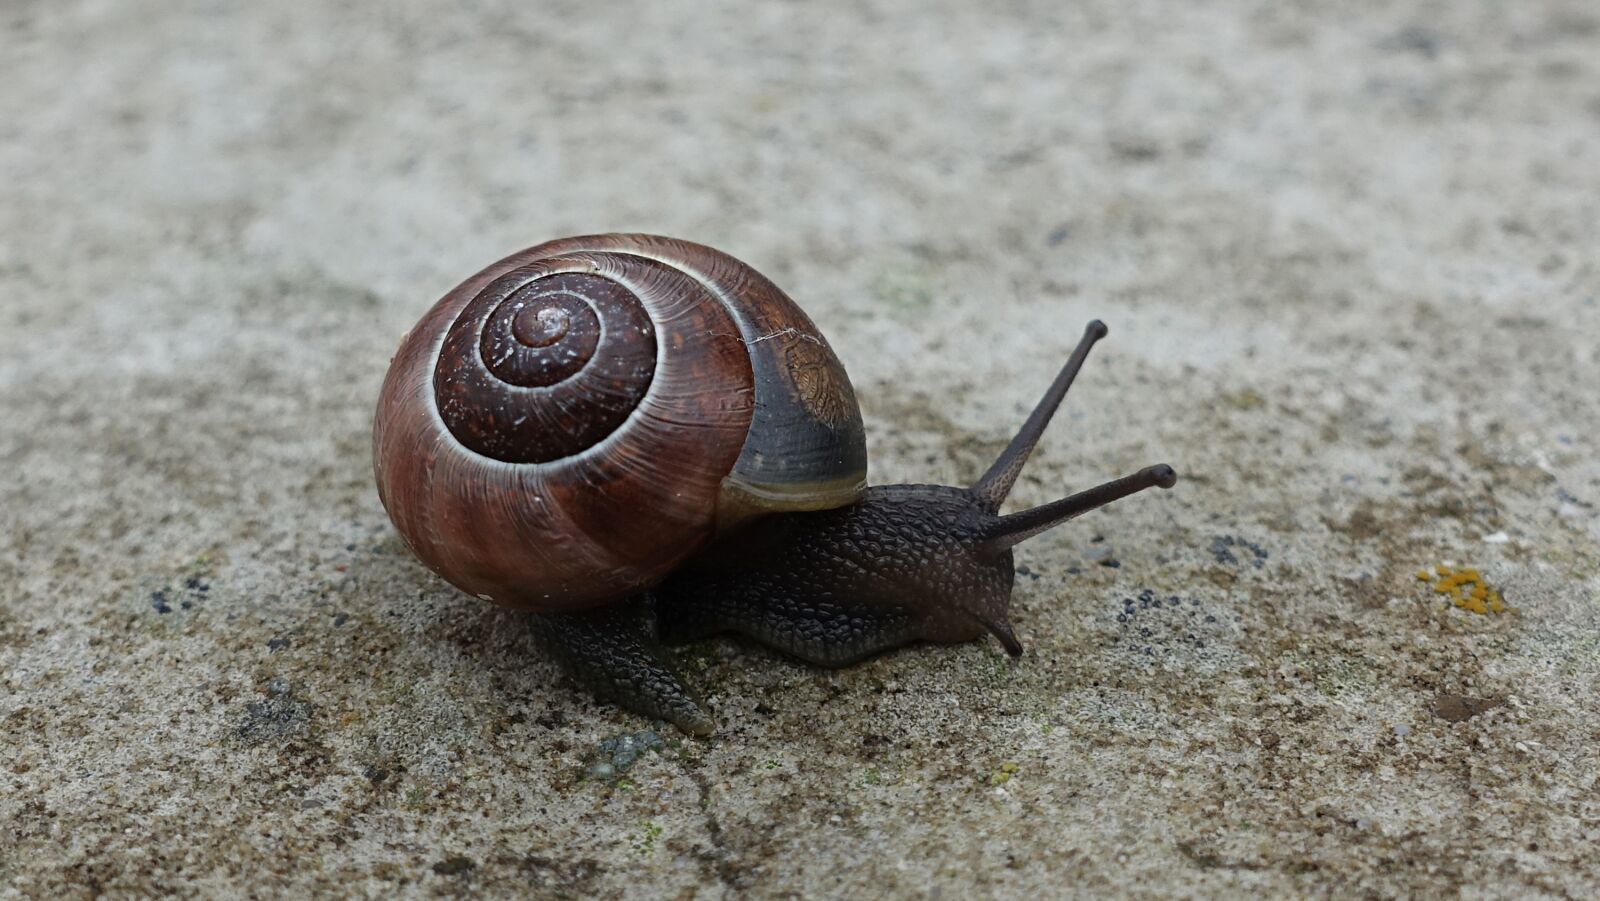 Sony Cyber-shot DSC-RX100 III sample photo. Snail, shell, reptile photography